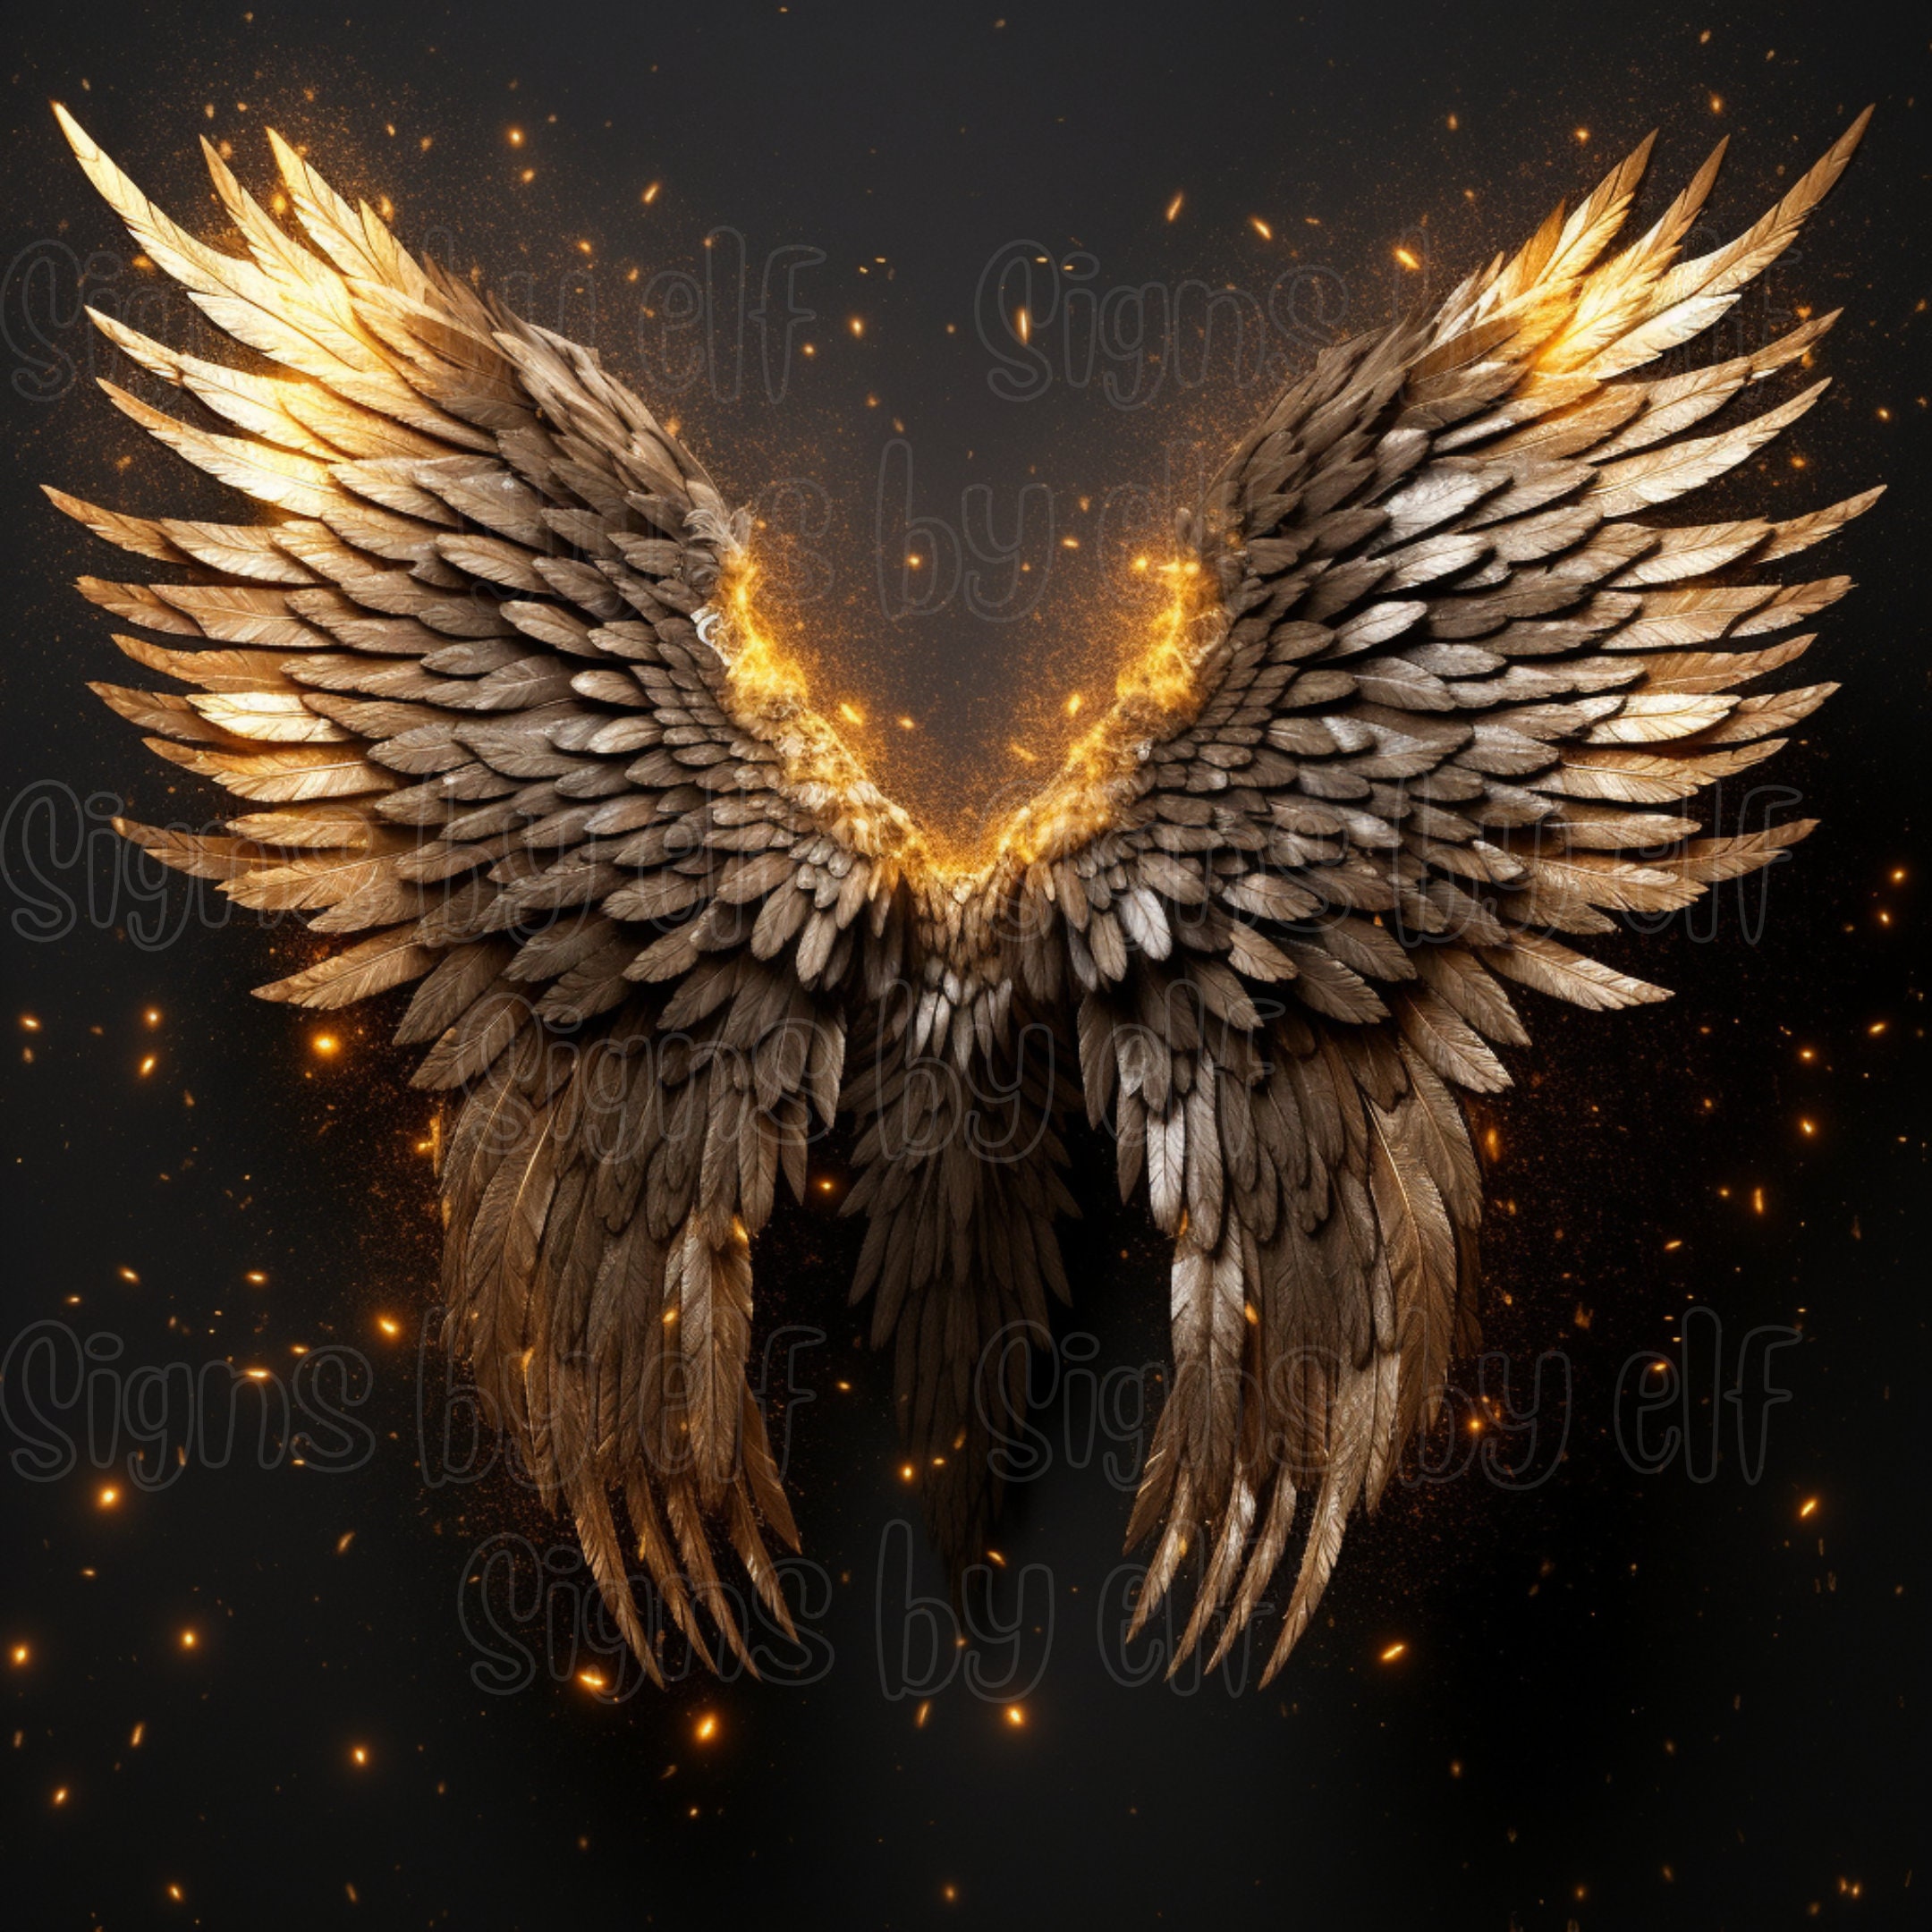 Magnificent Highly Detailed Image of Black & Gold Angel Wings